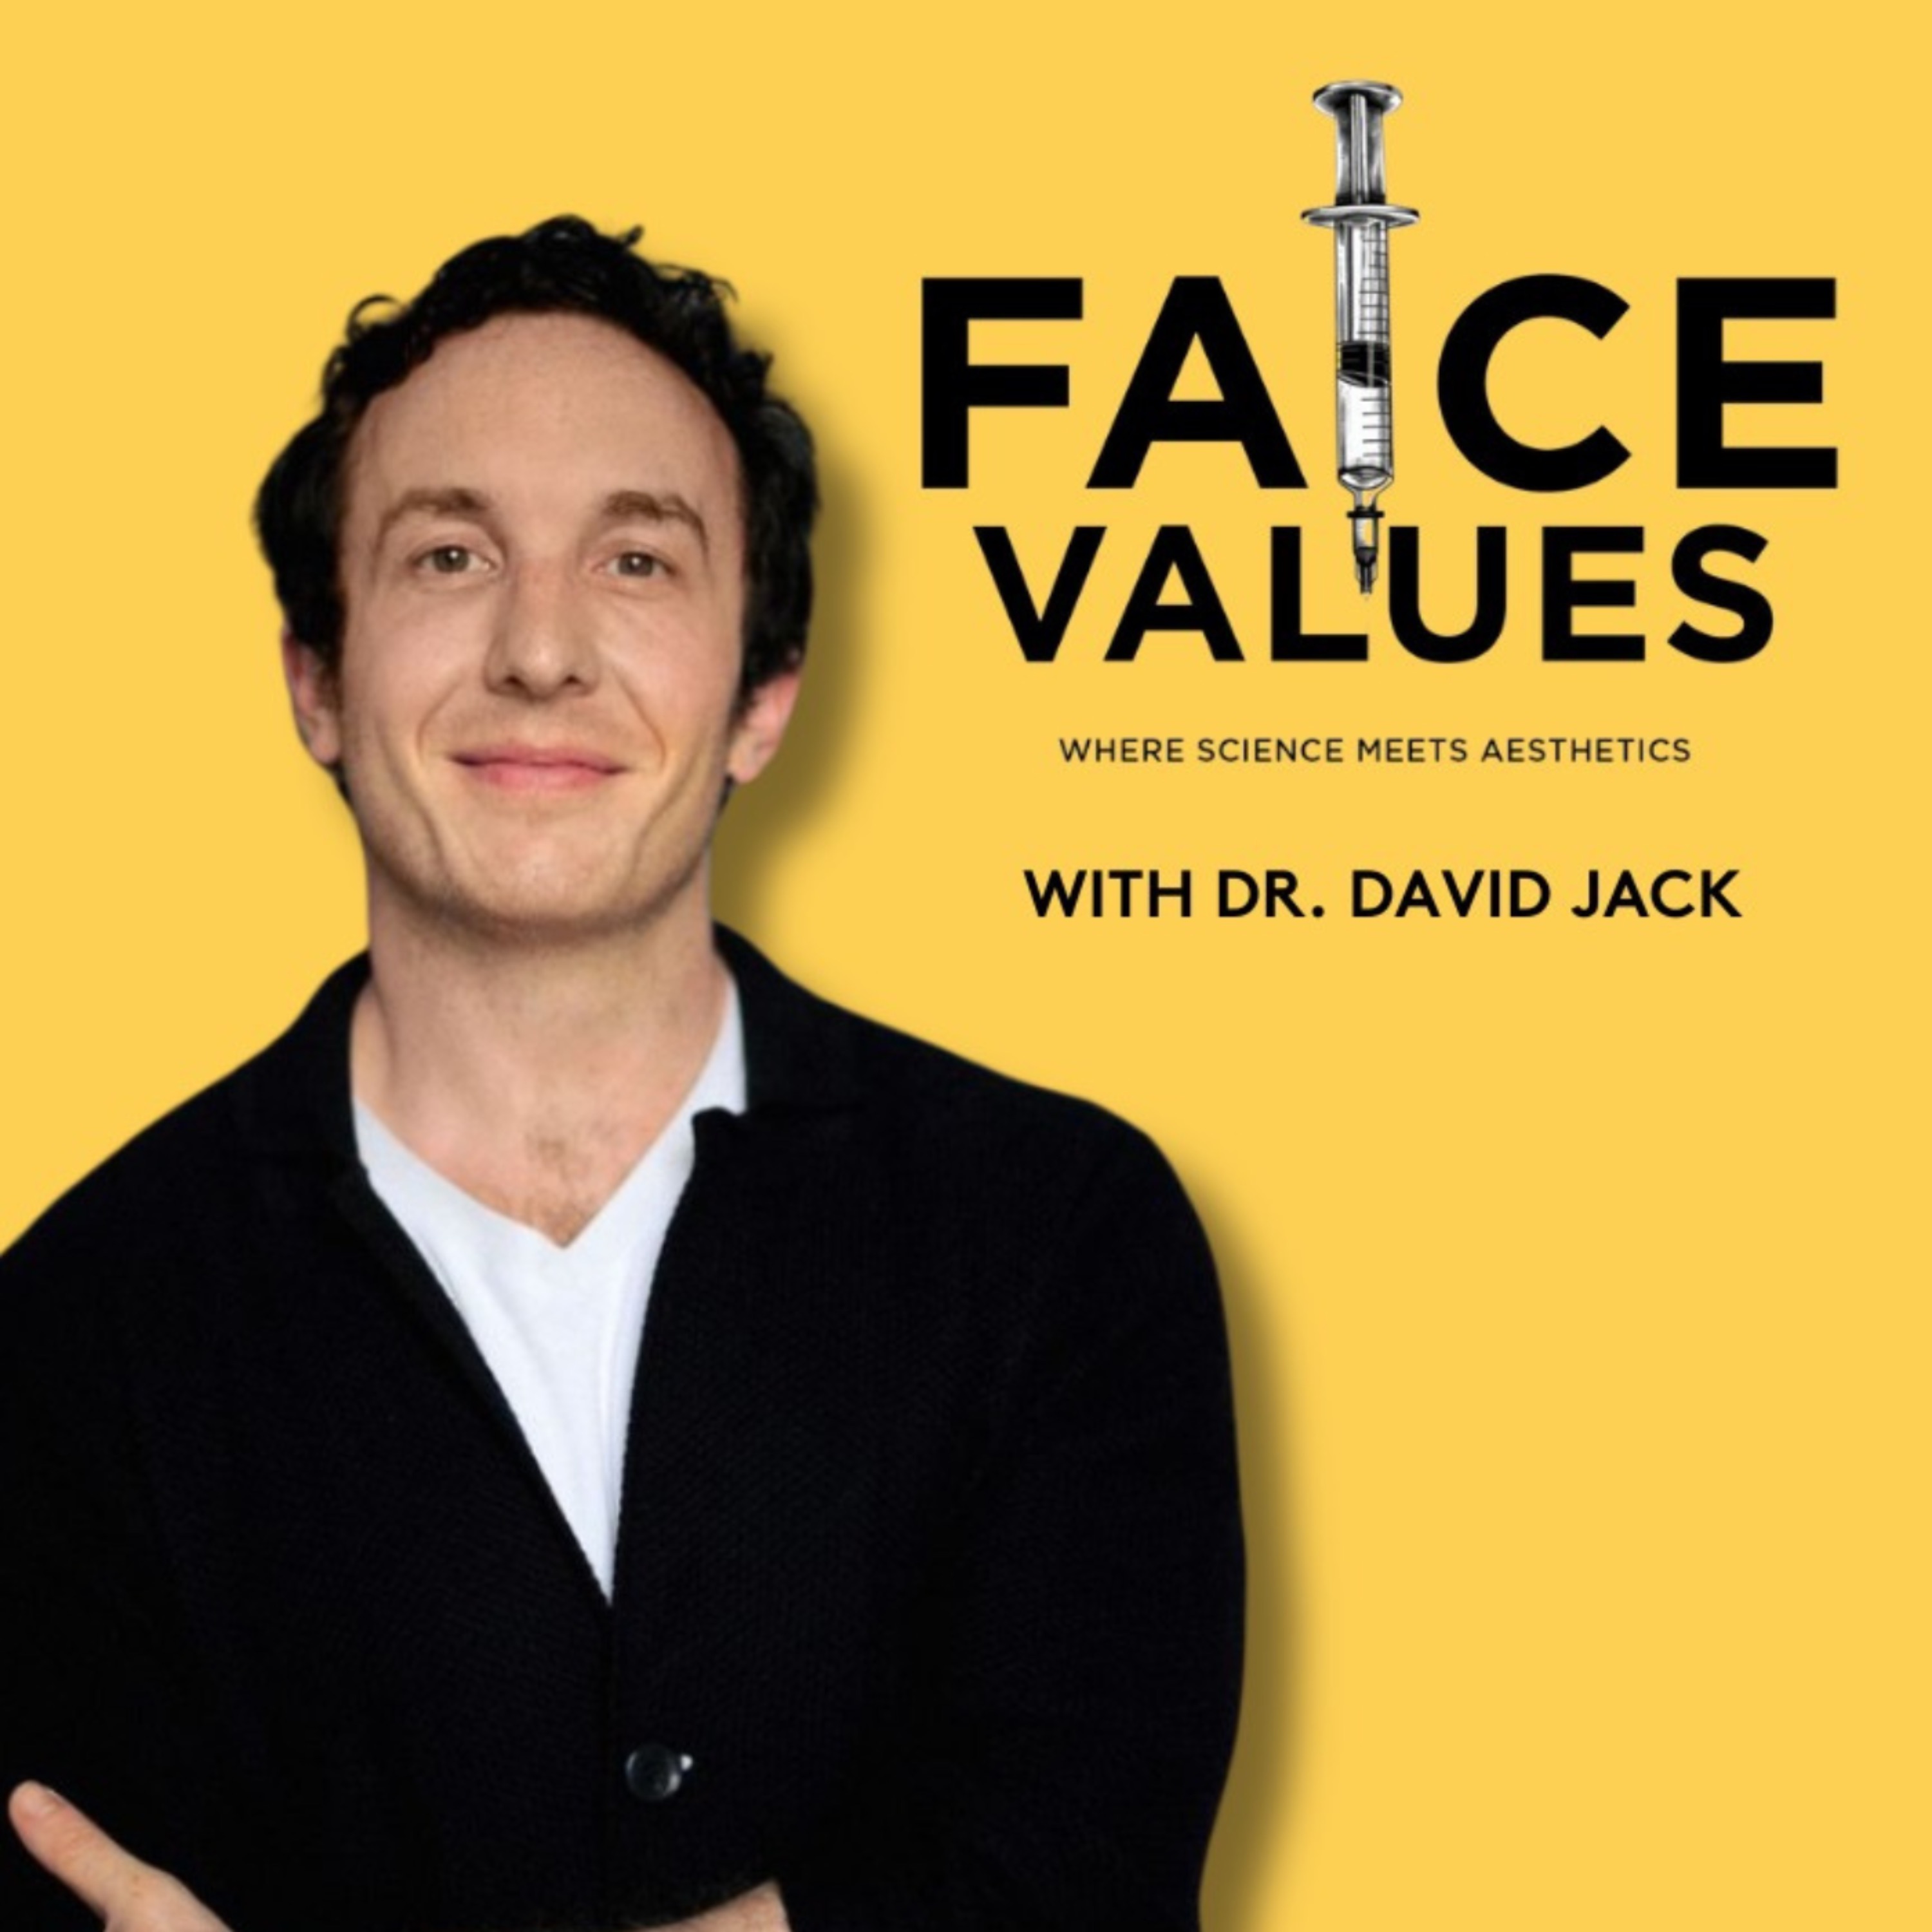 FACE VALUES Image